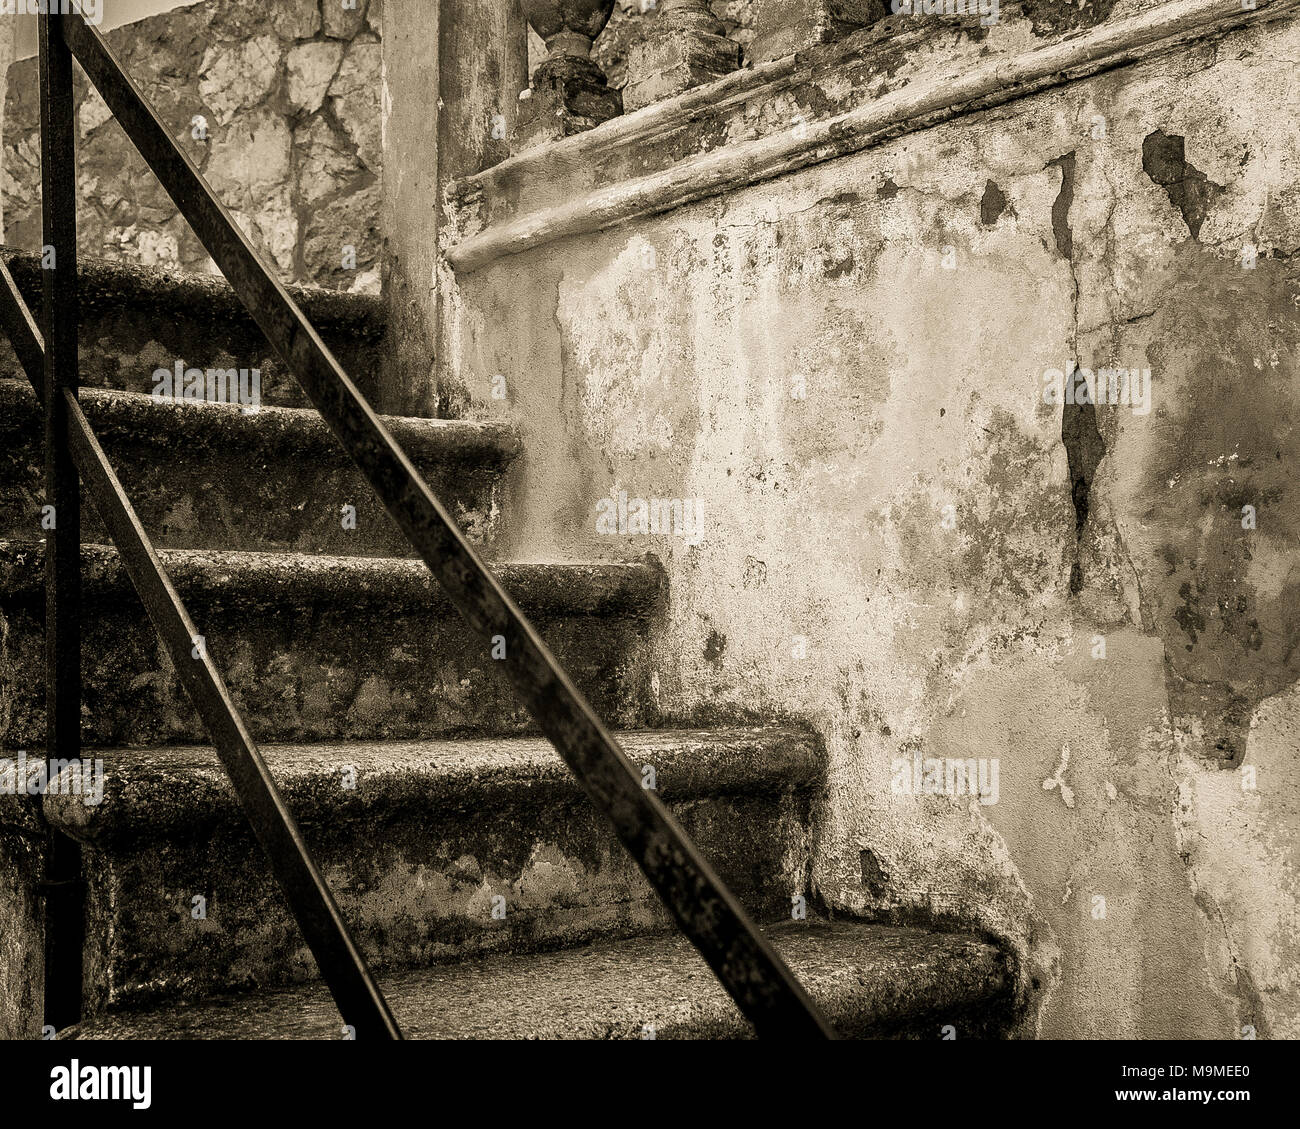 Decaying concrete steps and railing at Bunyola, Mallorca, Spain Stock Photo